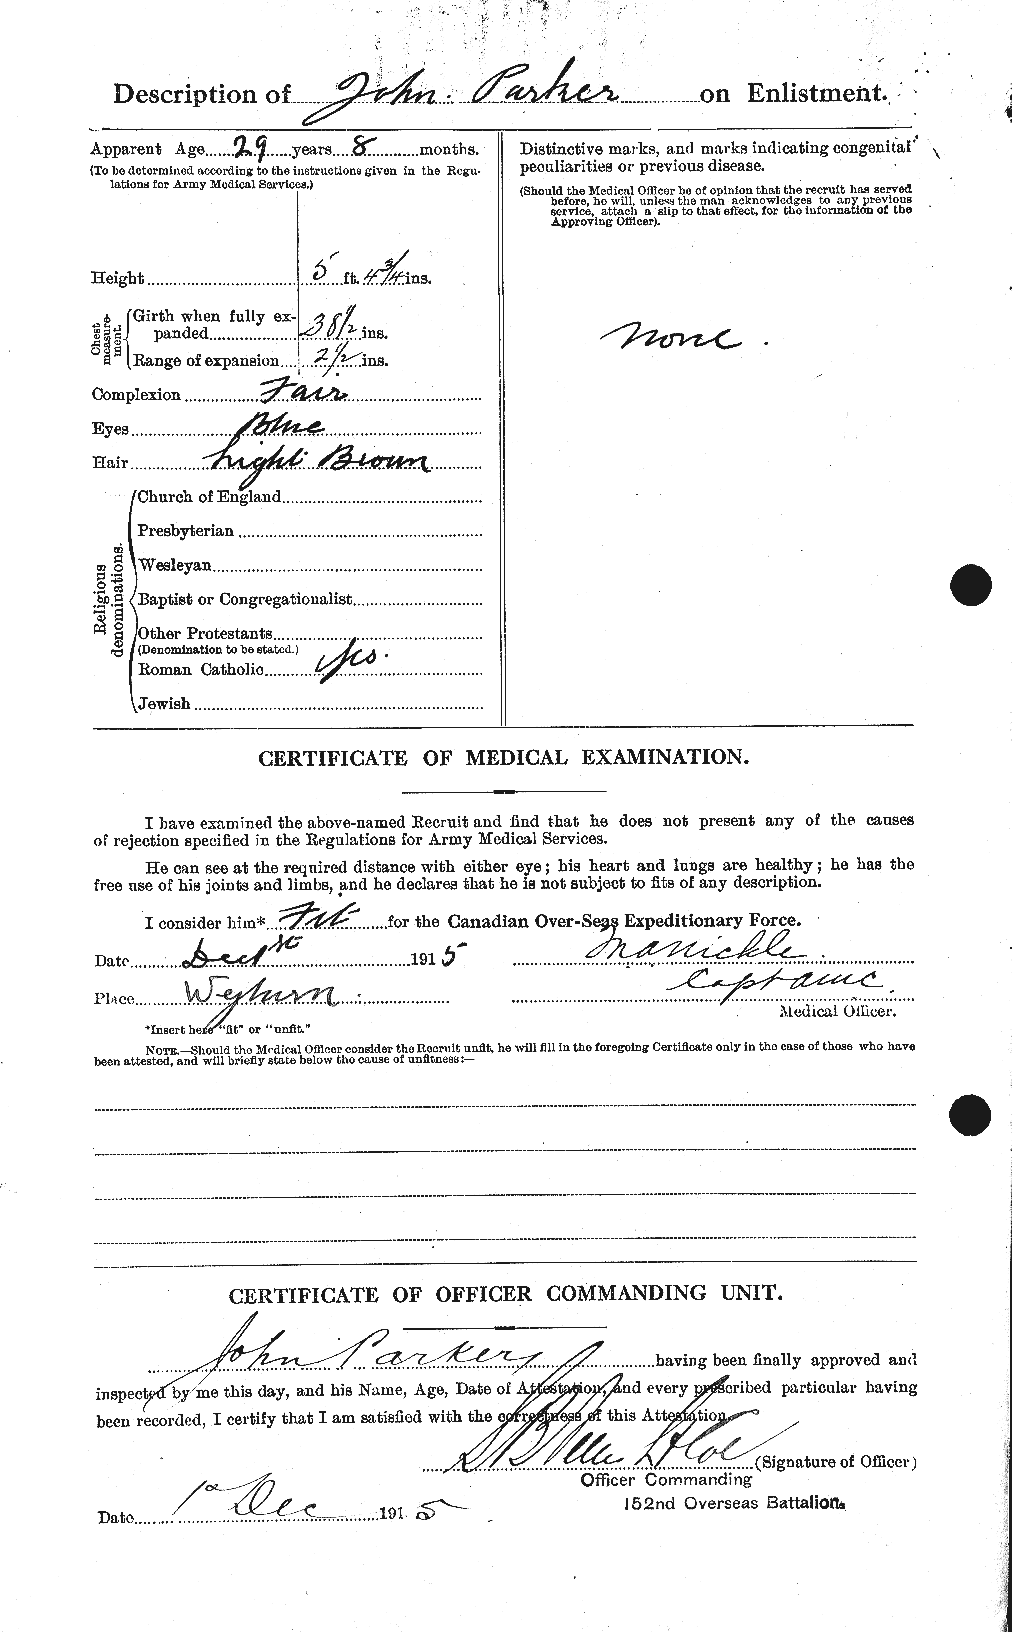 Personnel Records of the First World War - CEF 565455b